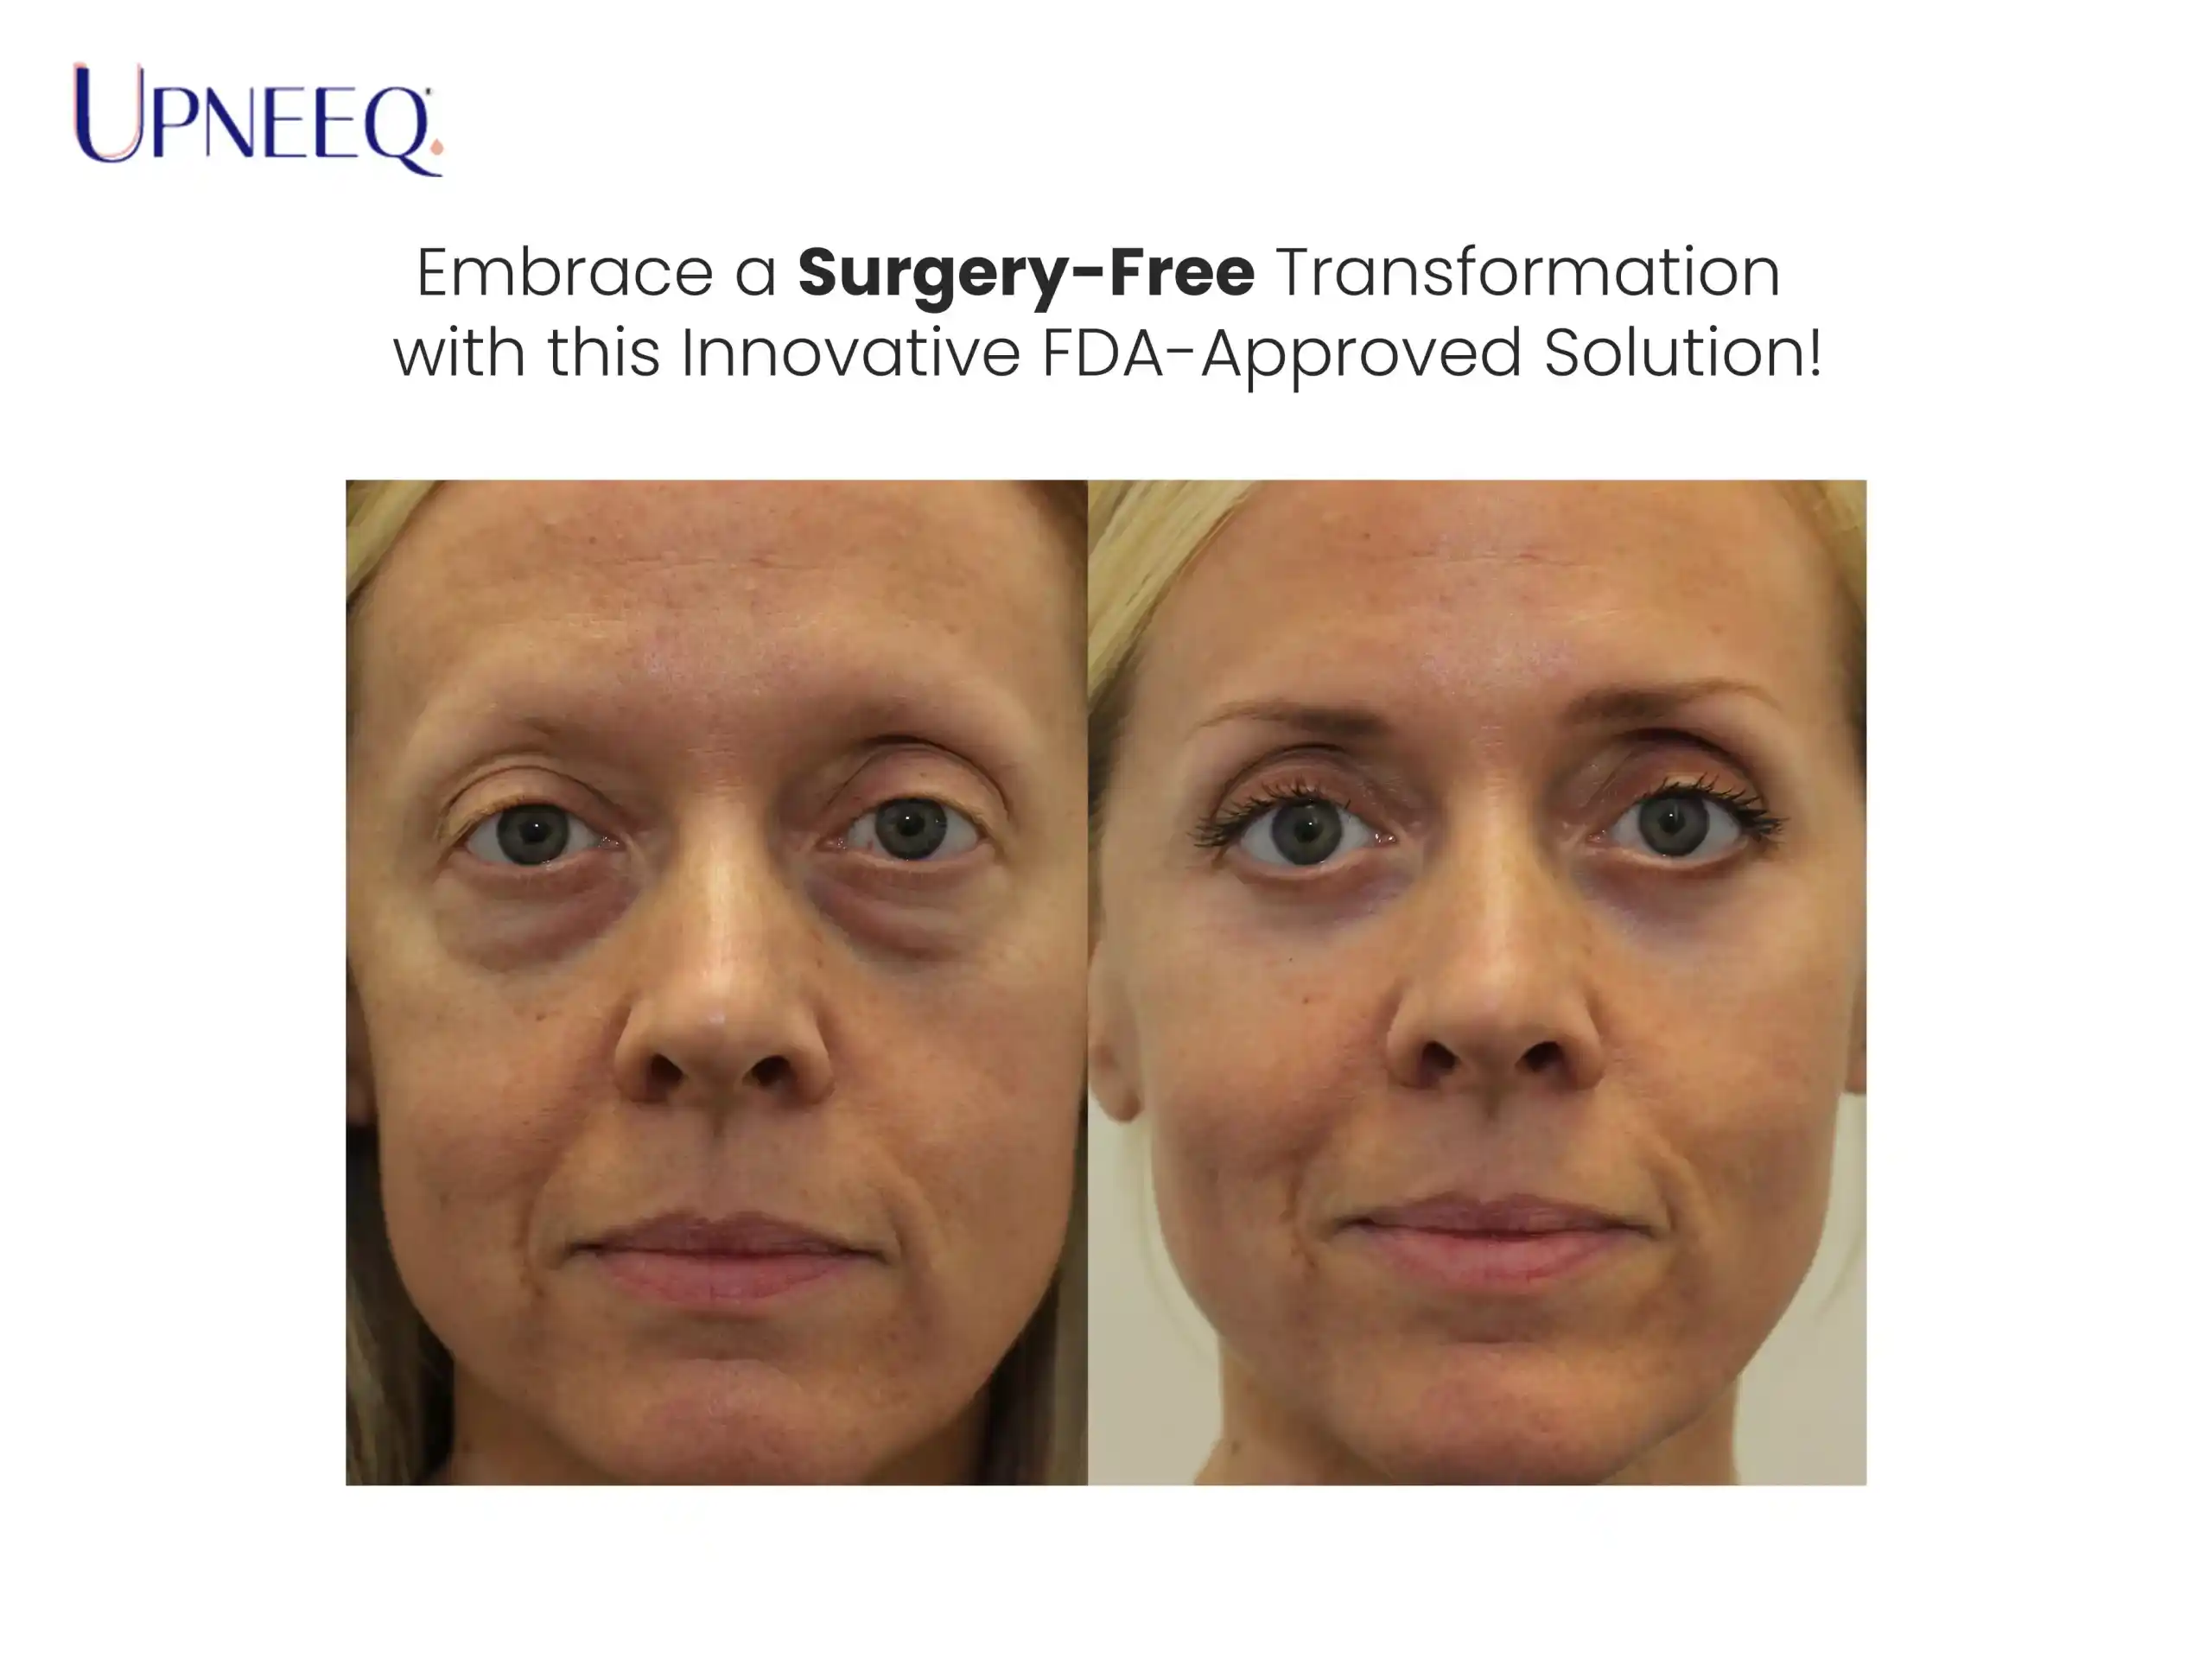 Embrace a Surgery-Free Transformation with this Innovative FDA-Approved Solution